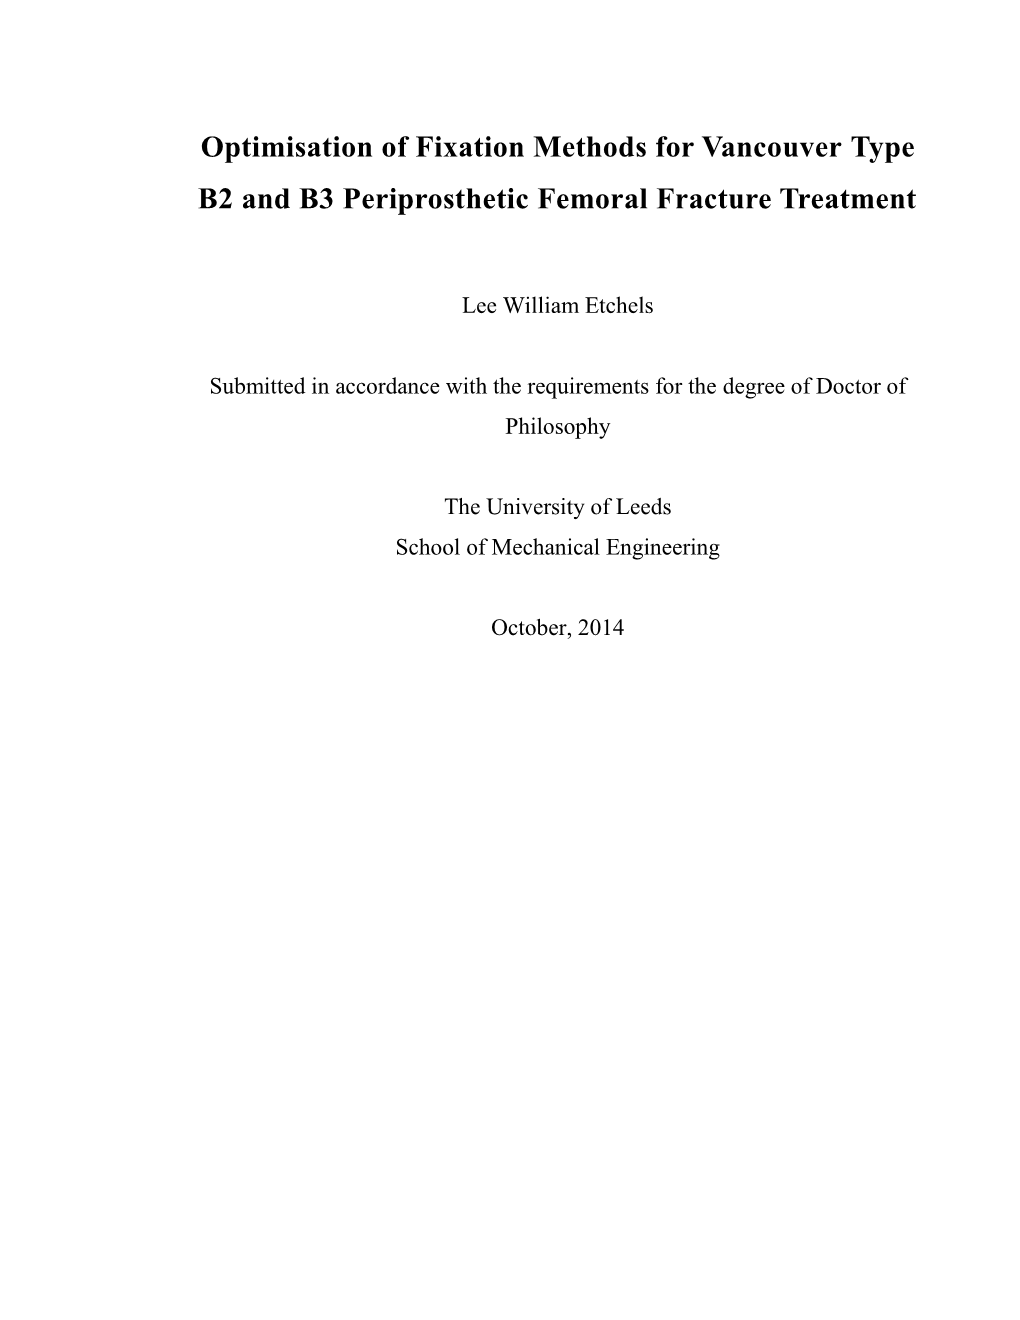 Optimisation of Fixation Methods for Vancouver Type B2 and B3 Periprosthetic Femoral Fracture Treatment